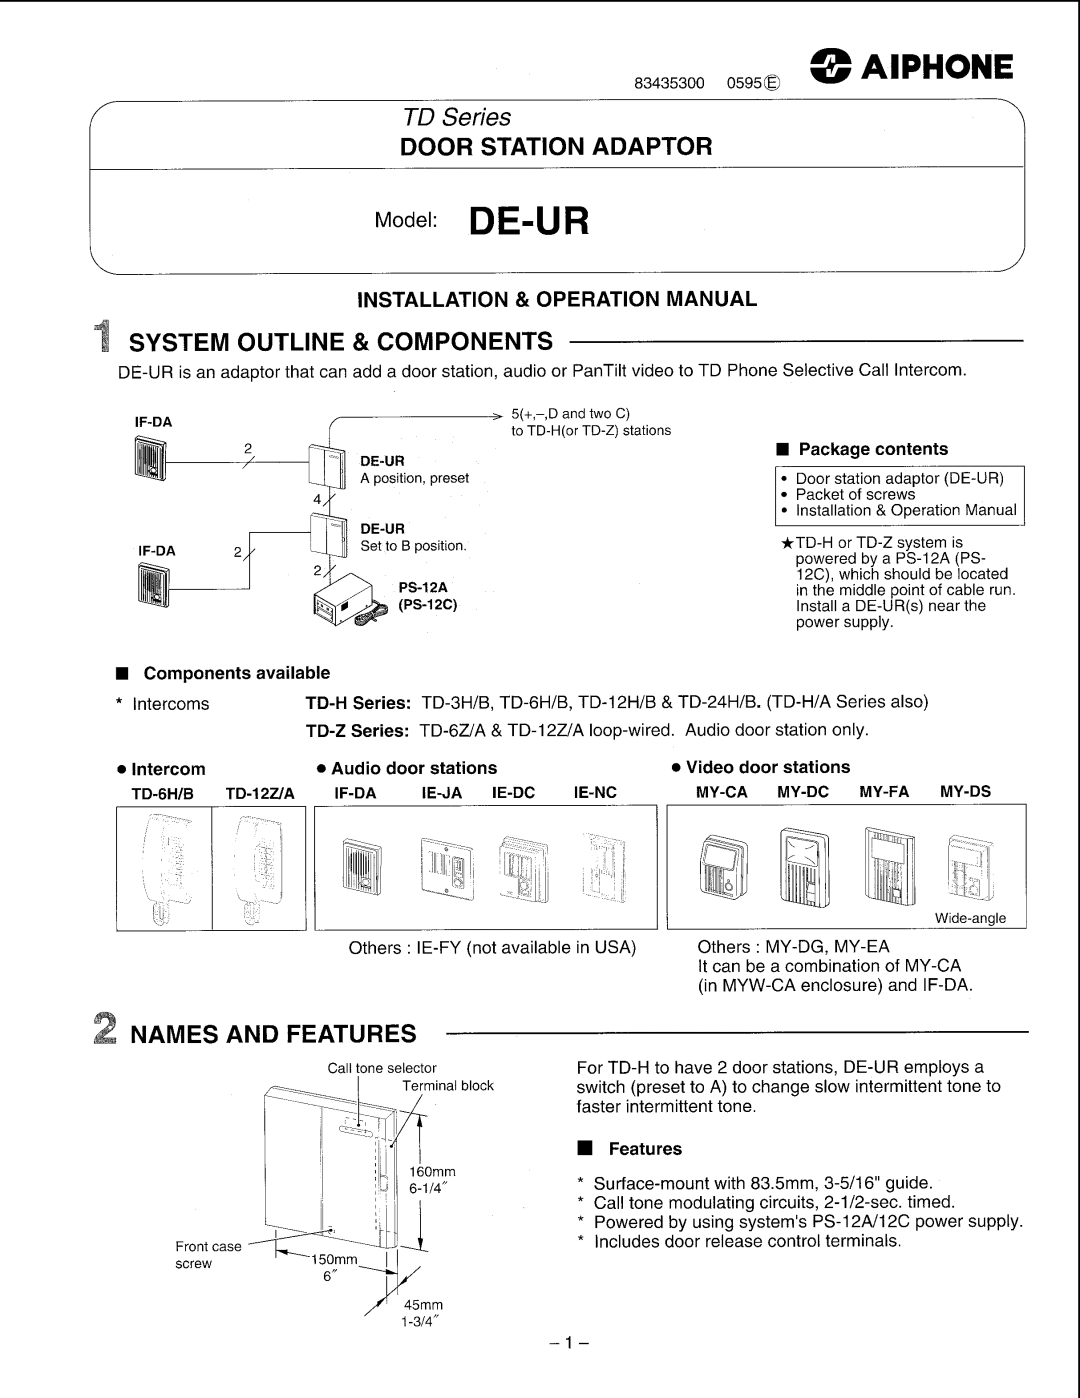 Aiphone DE-UR operation manual Door Station Adaptor, System Outline & Components, Names And Features, AlPHONE, TD Series 